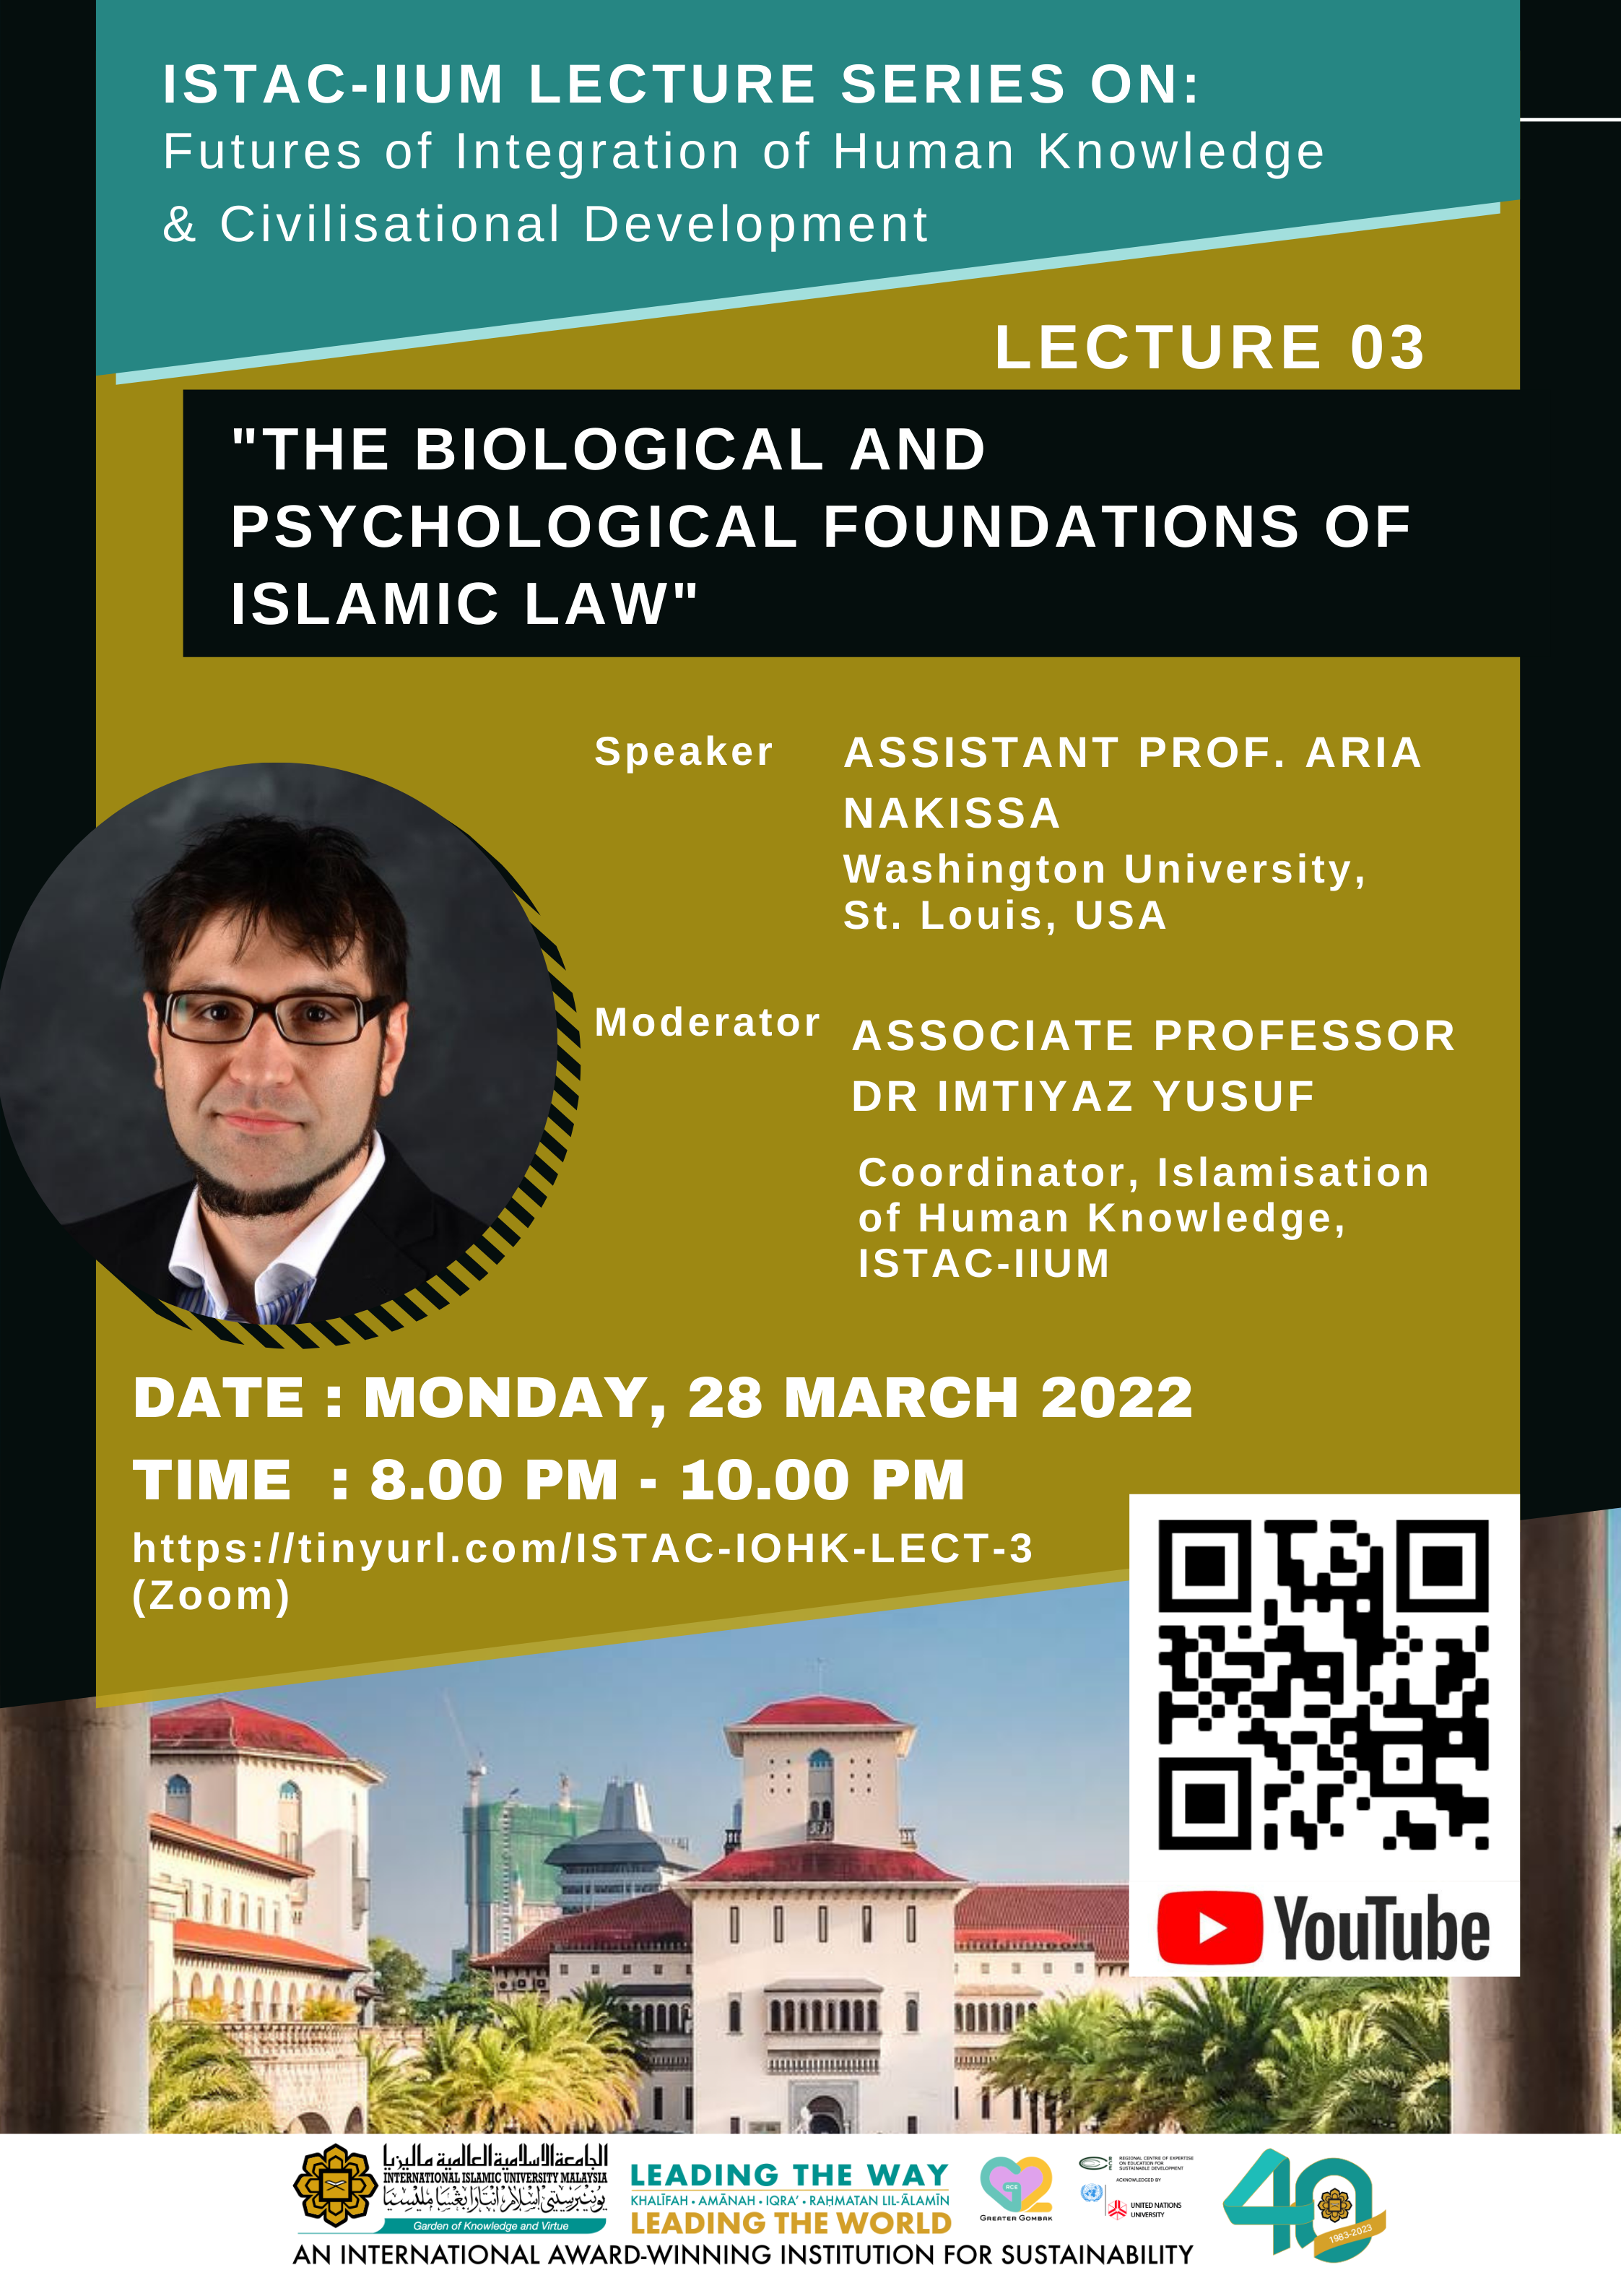 ISTAC-IIUM  LECTURE SERIES 03:  ON FUTURES OF INTEGRATION OF HUMAN KNOWLEDGE & CIVILISATIONAL DEVELOPMENT